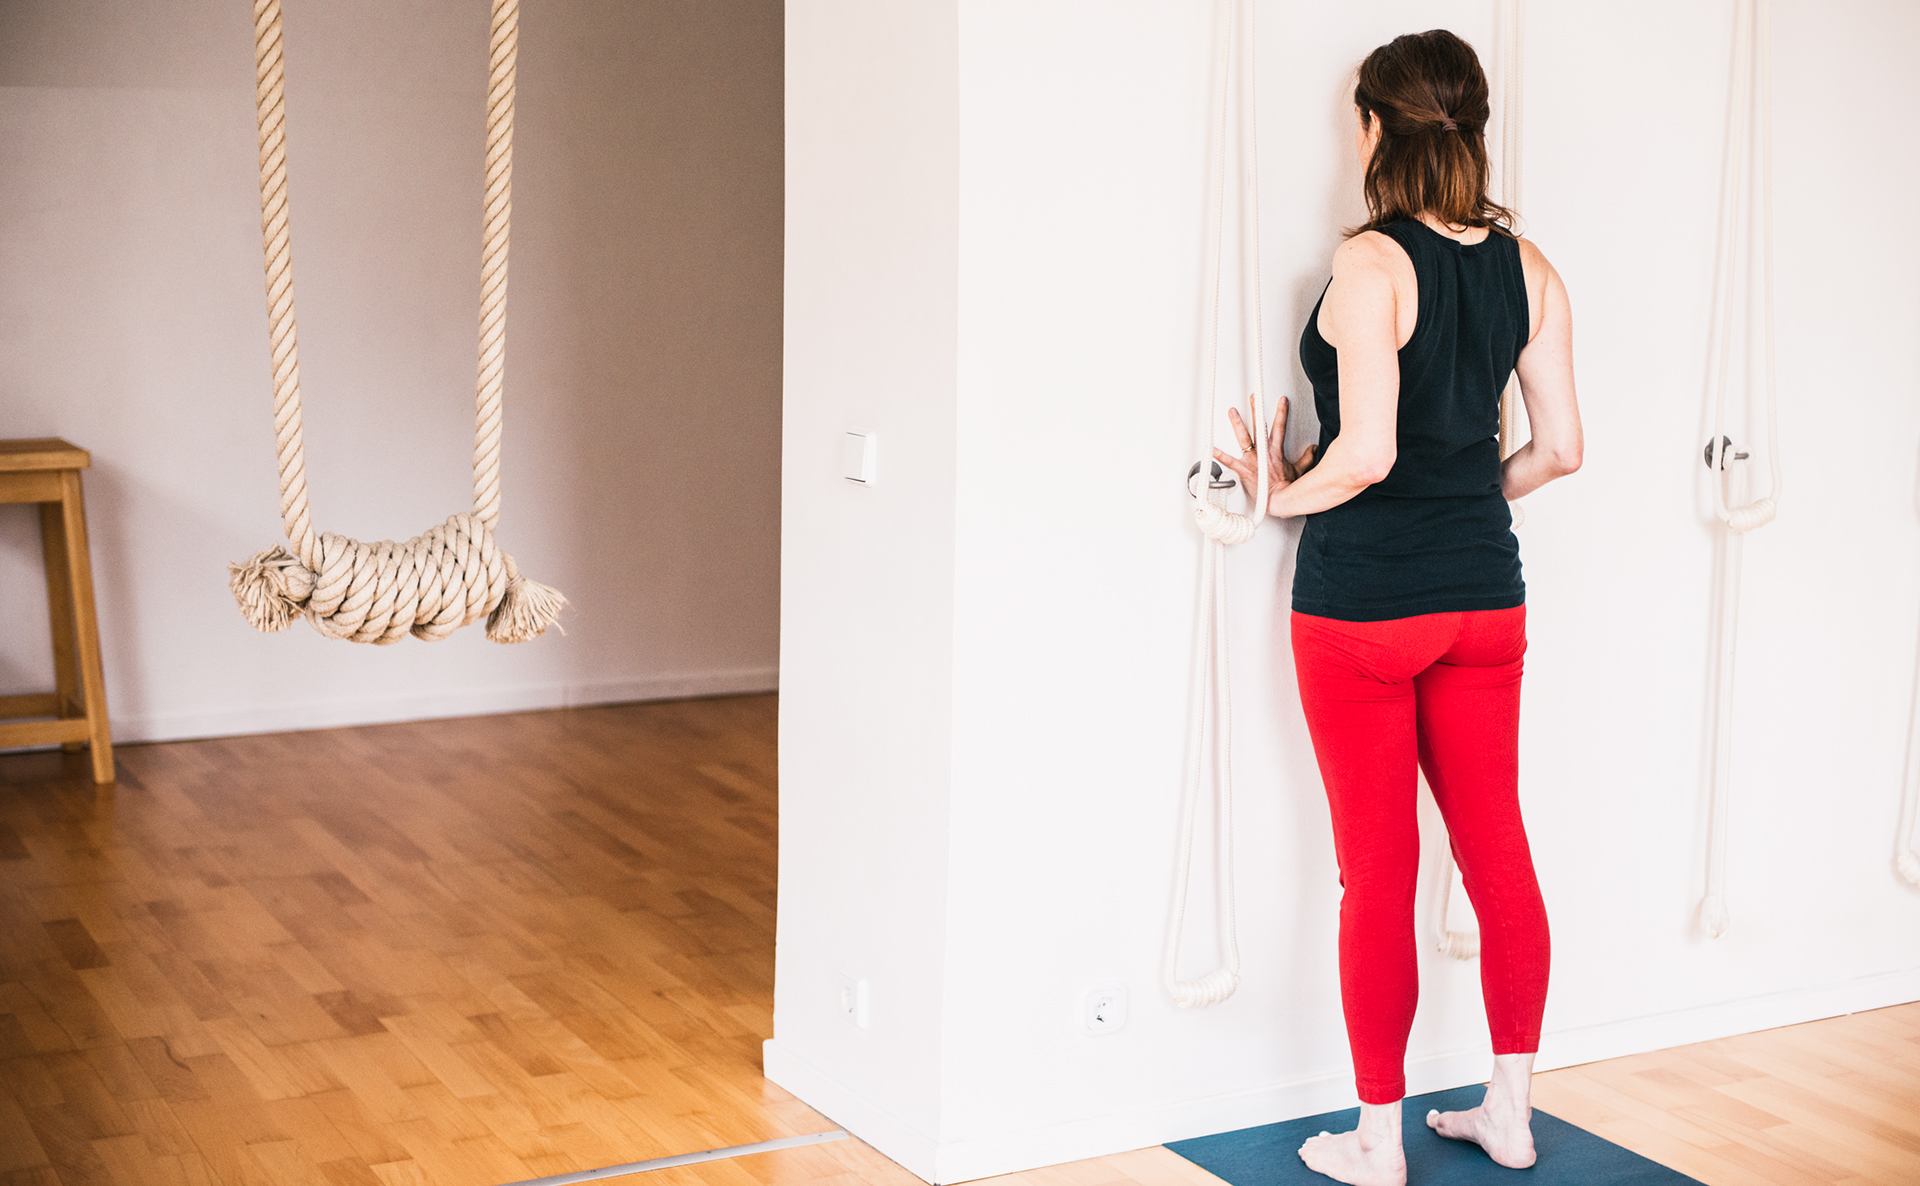 Iyengar Yoga General Level Sequence - Standing forward bend - Uttanasana with hands on the wall